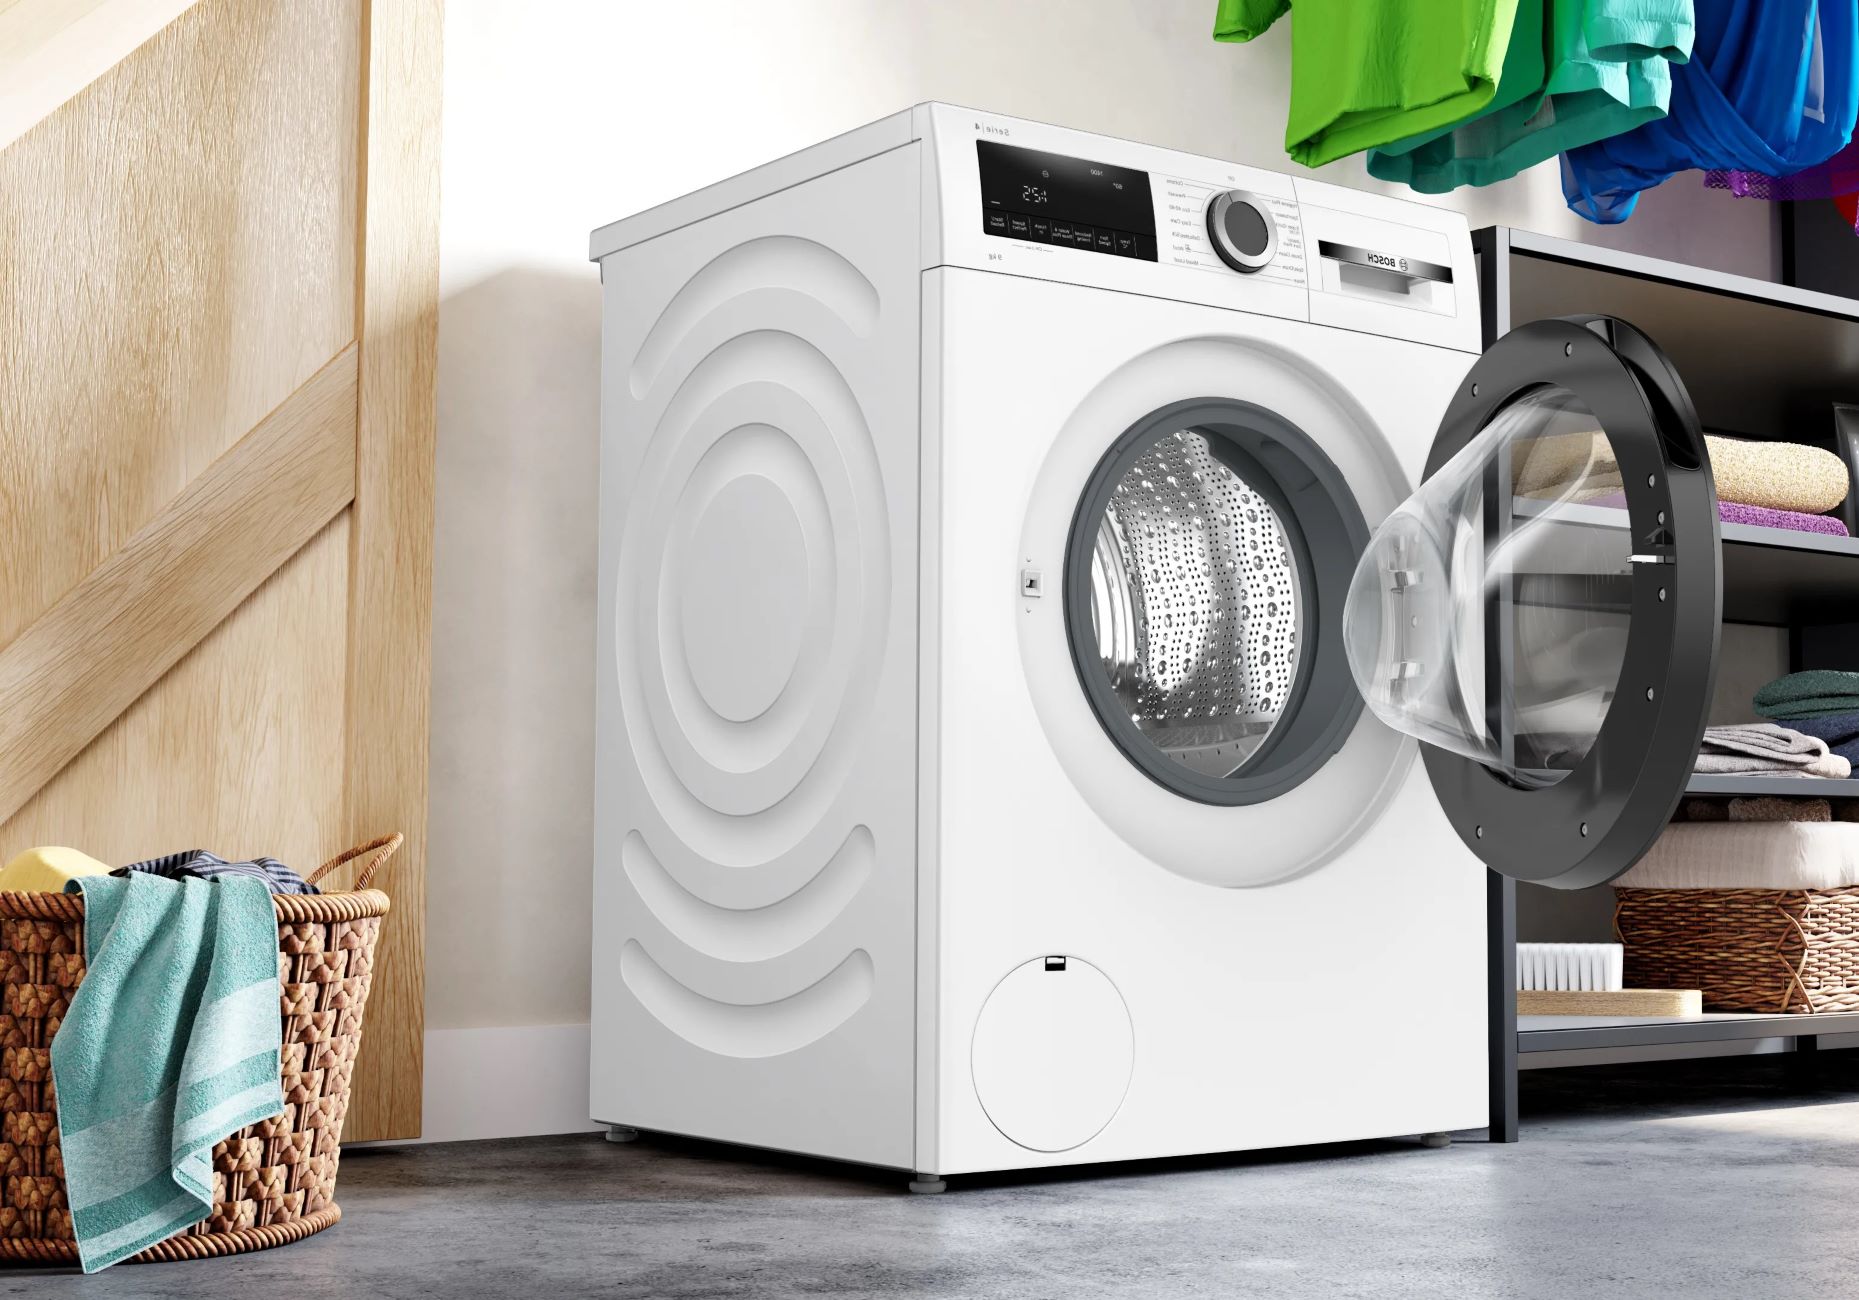 How To Reset A Whirlpool Front Loader Washing Machine